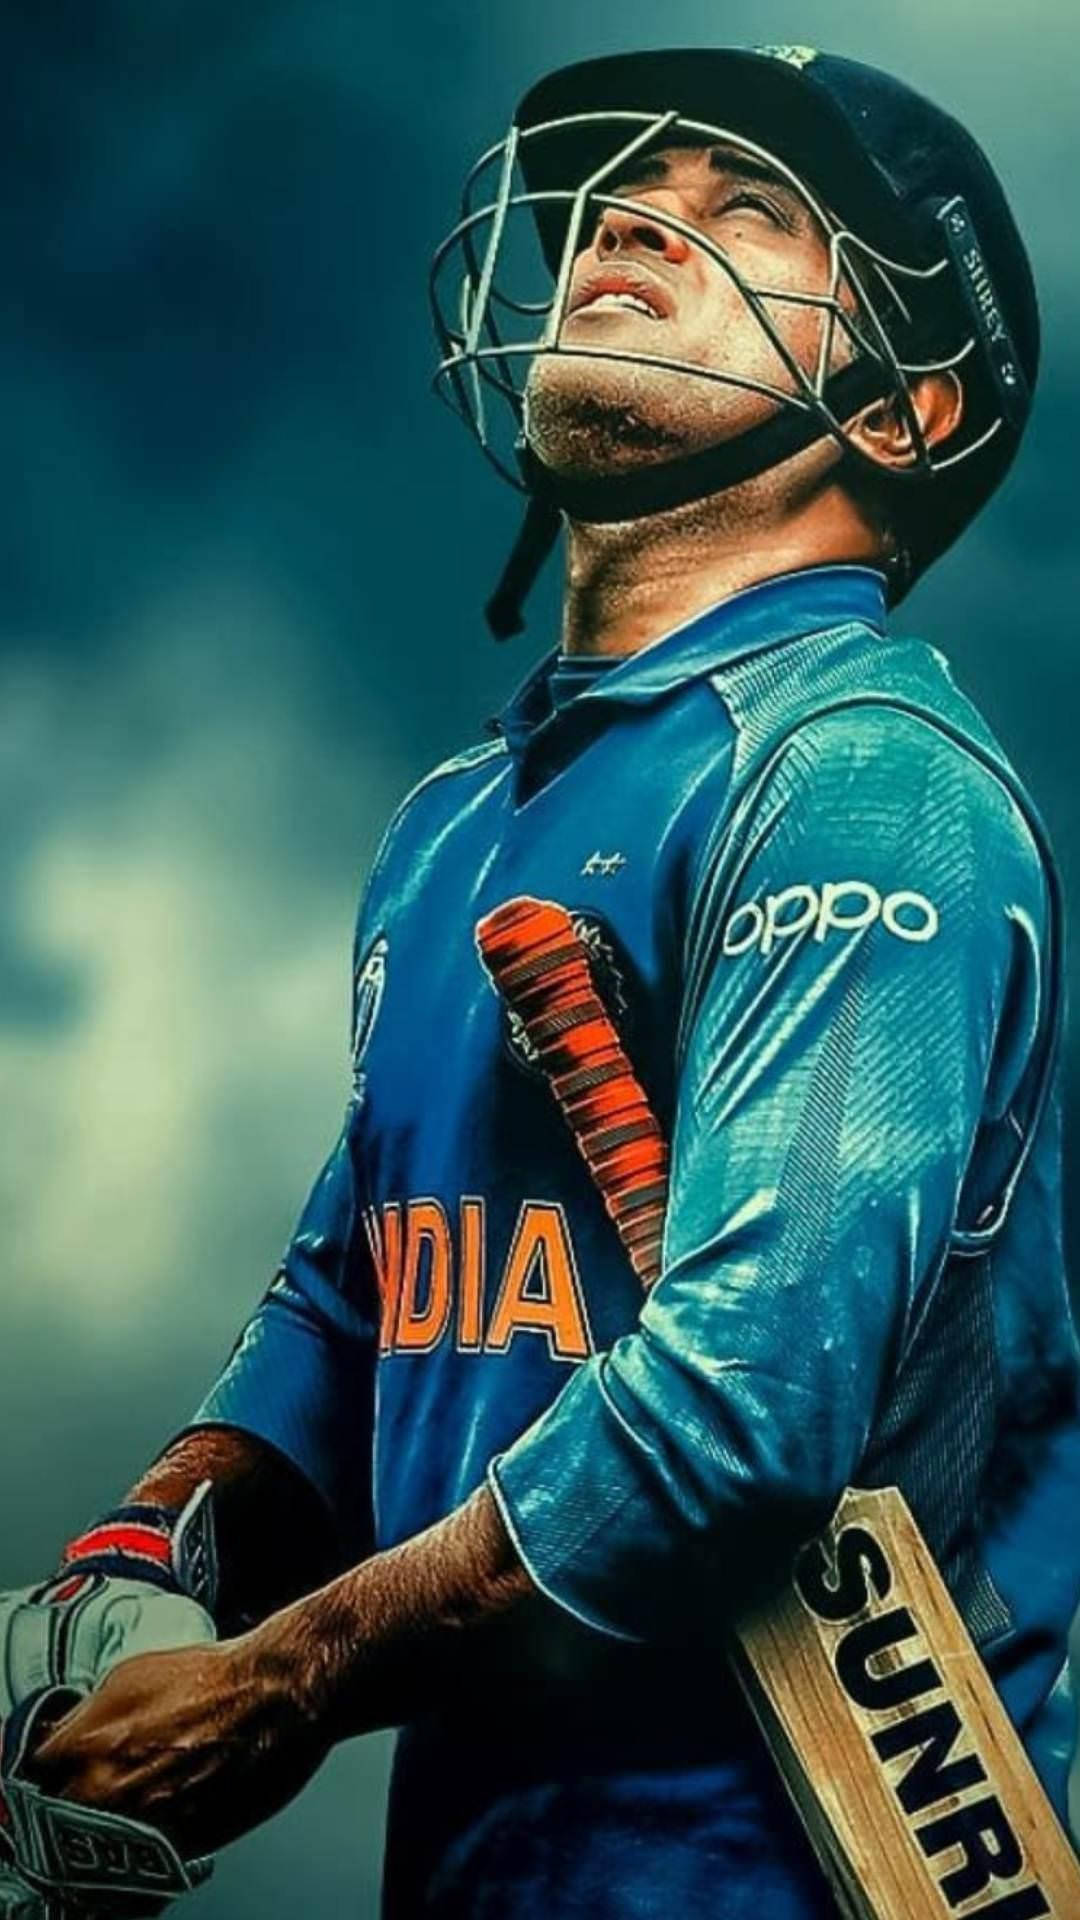 The Legendary Indian Cricket Player, Ms Dhoni On Field Wallpaper